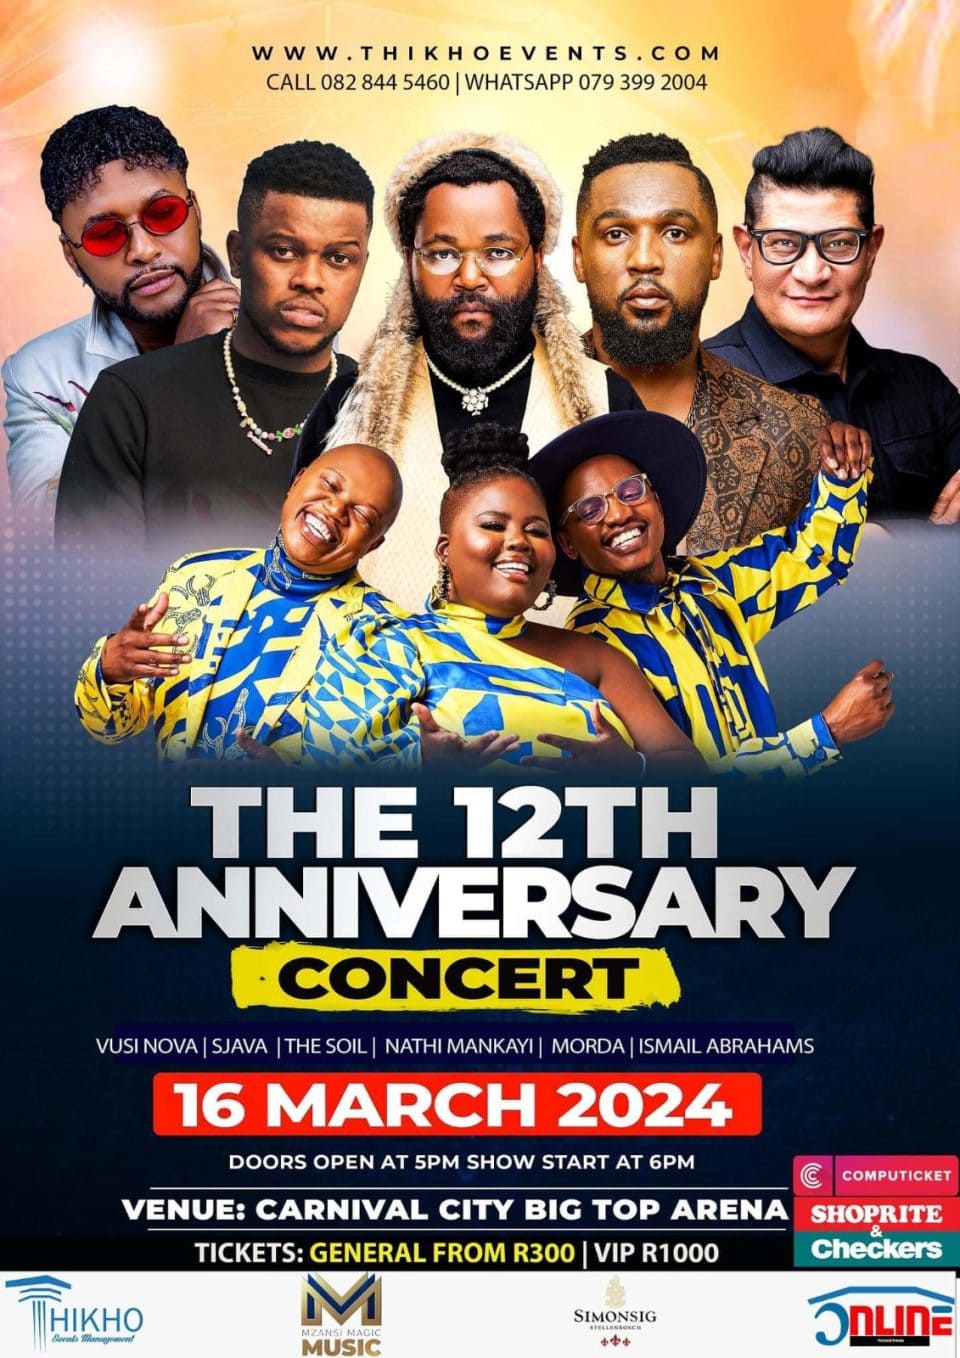 MZANSI MAGIC MUSIC JOINS FORCES WITH THIKHO EVENTS TO ELEVATE THE 12TH YEAR ANNIVERSARY CONCERT EXPERIENCE